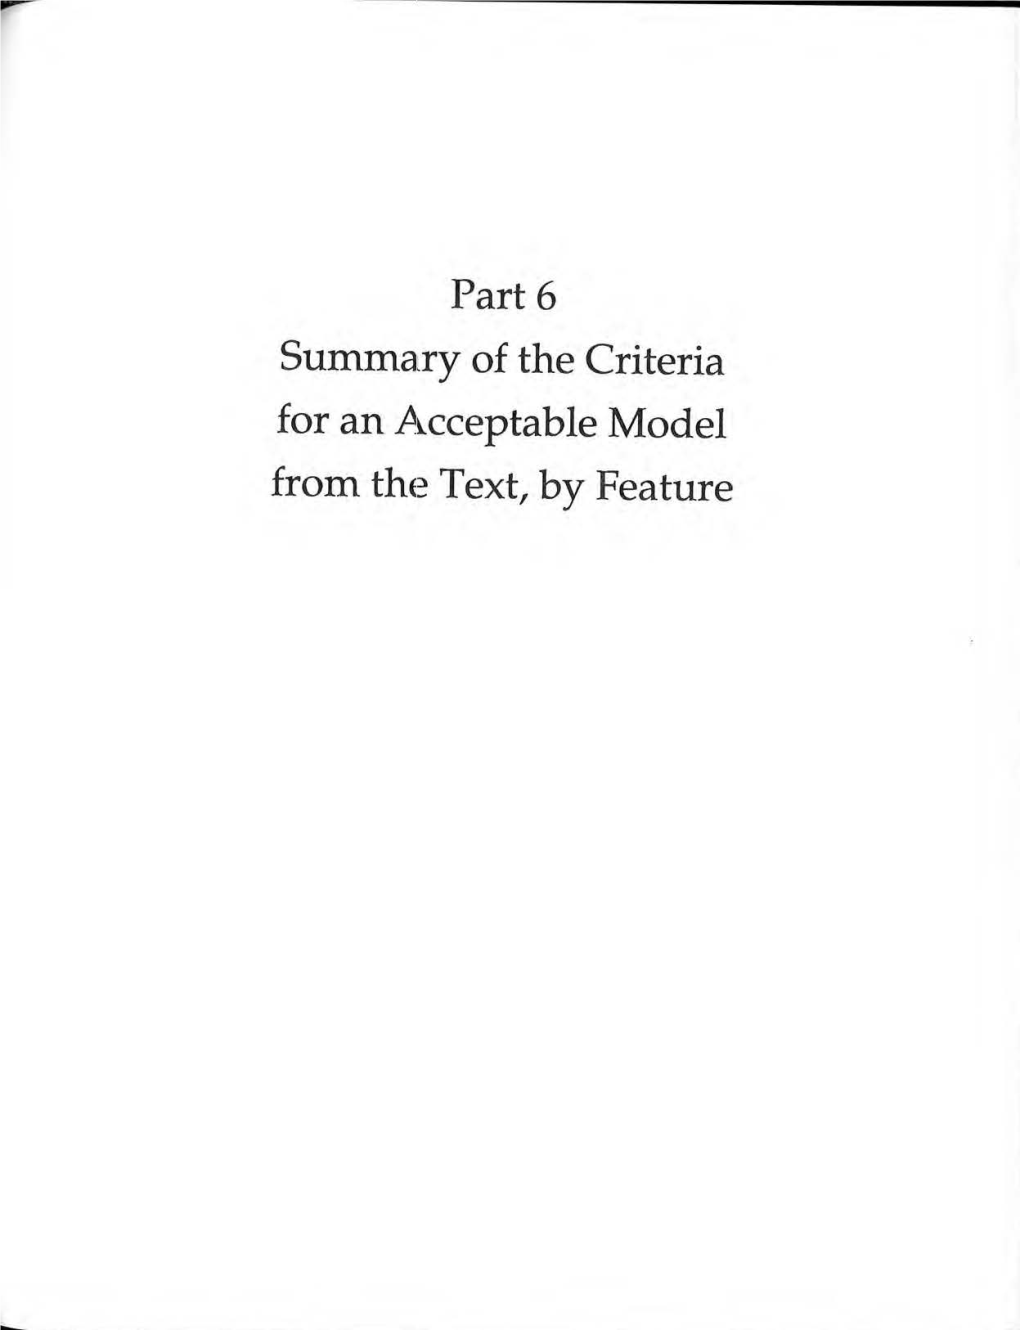 Part 6 Summa,Ry of the Criteria for an A~Cceptable Model from the Text, by Feature Sumtmary of Criteria